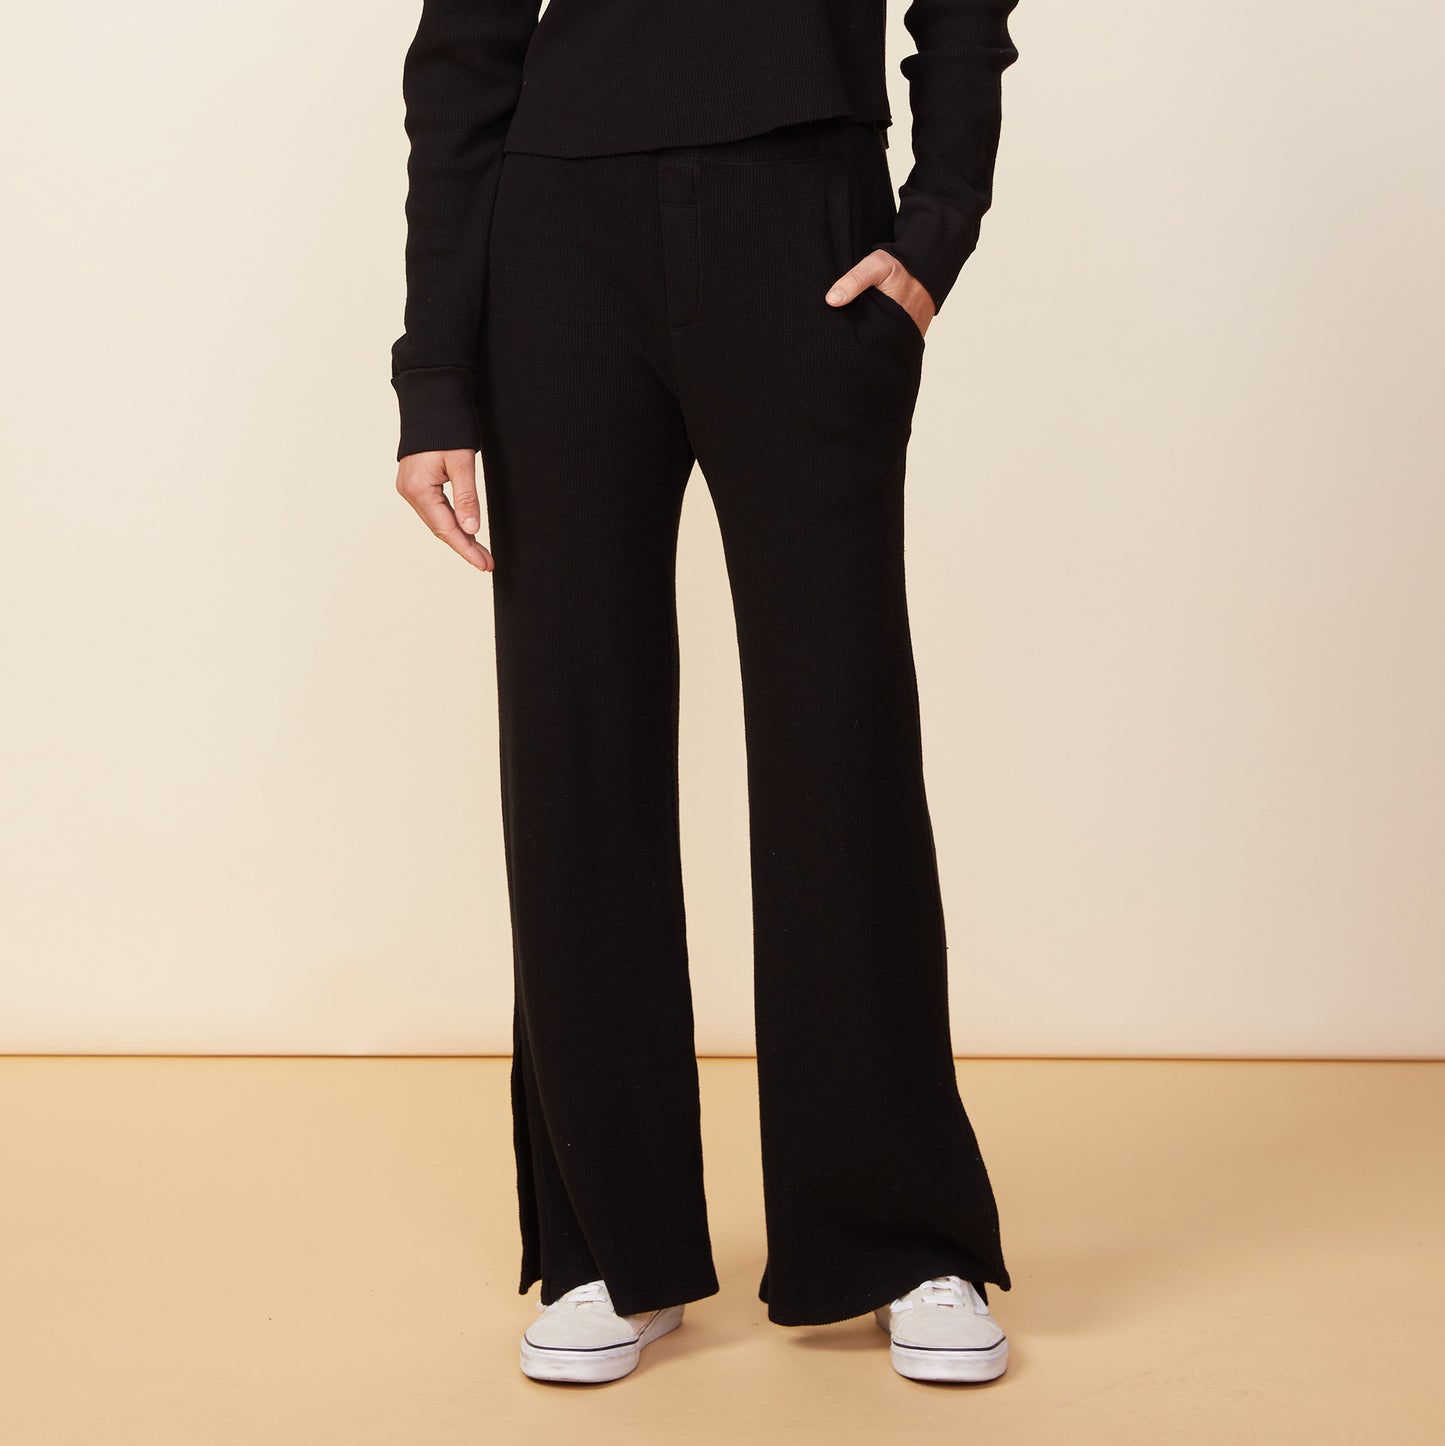 Front view of model wearing the thermal pants in black.